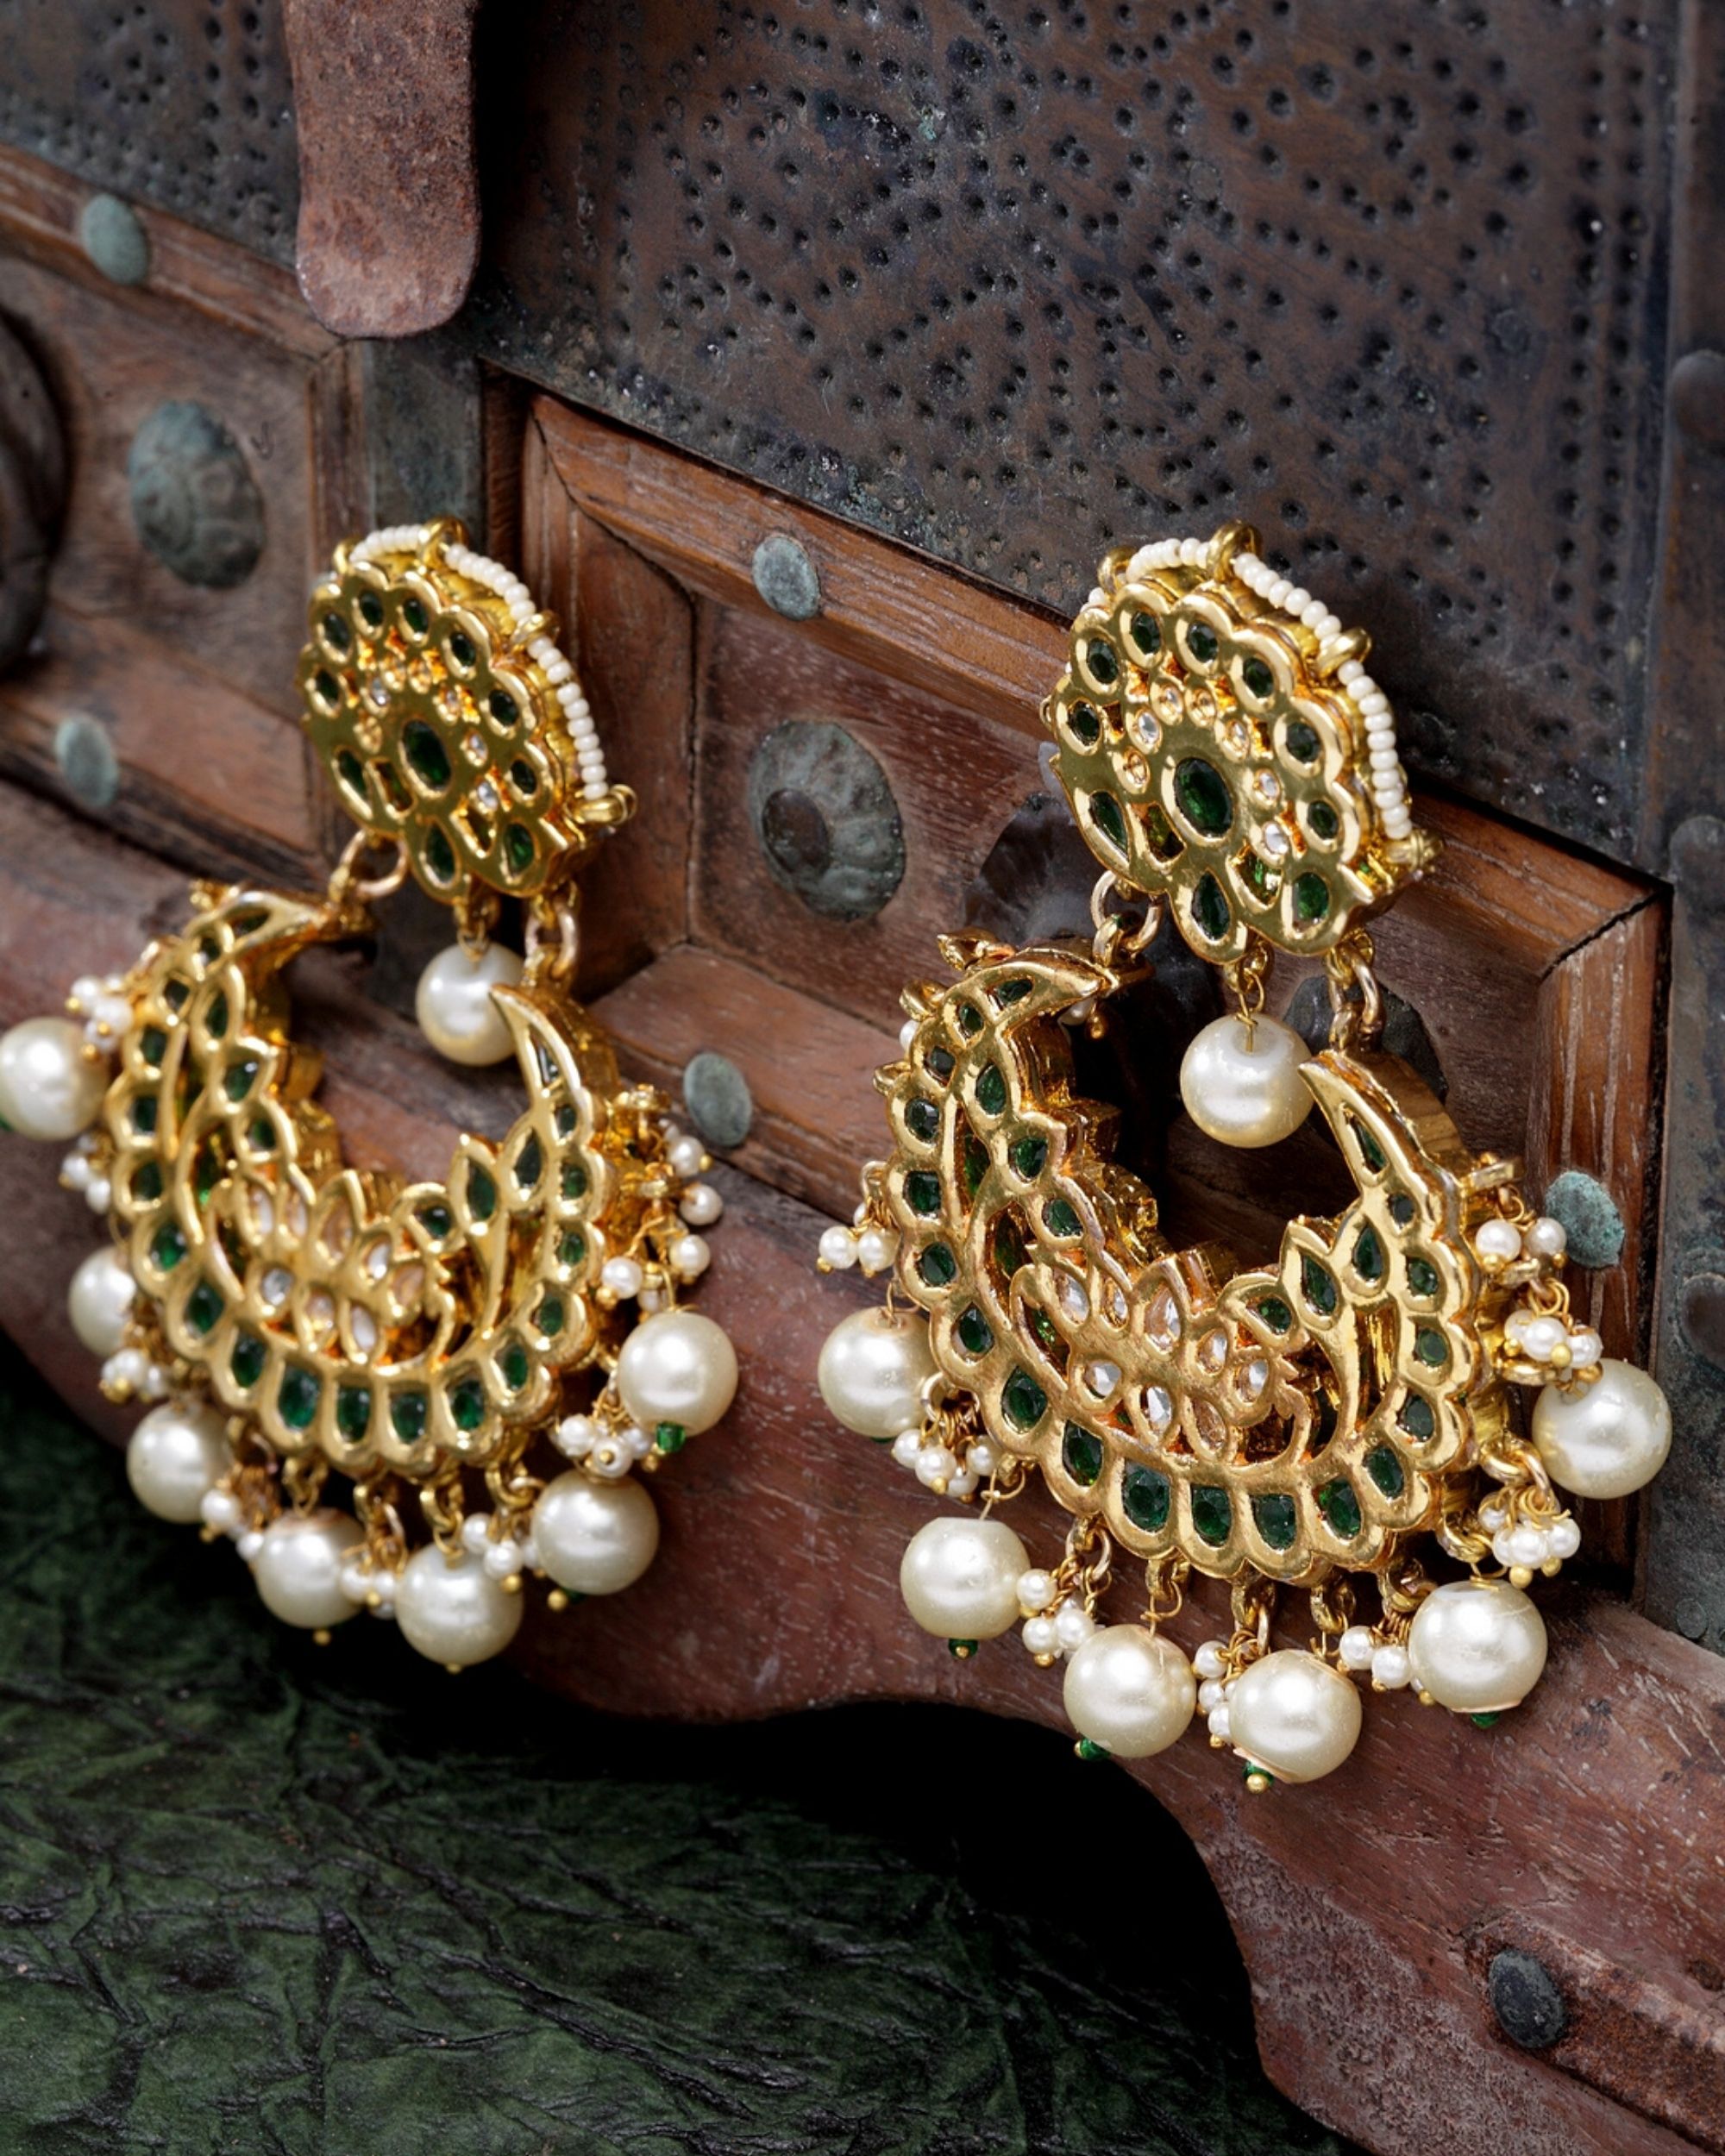 Shop Rubans 24K Gold Plated Handcrafted Kundan  Enamel with White Pearls  Chand Bali Earrings Online at Rubans